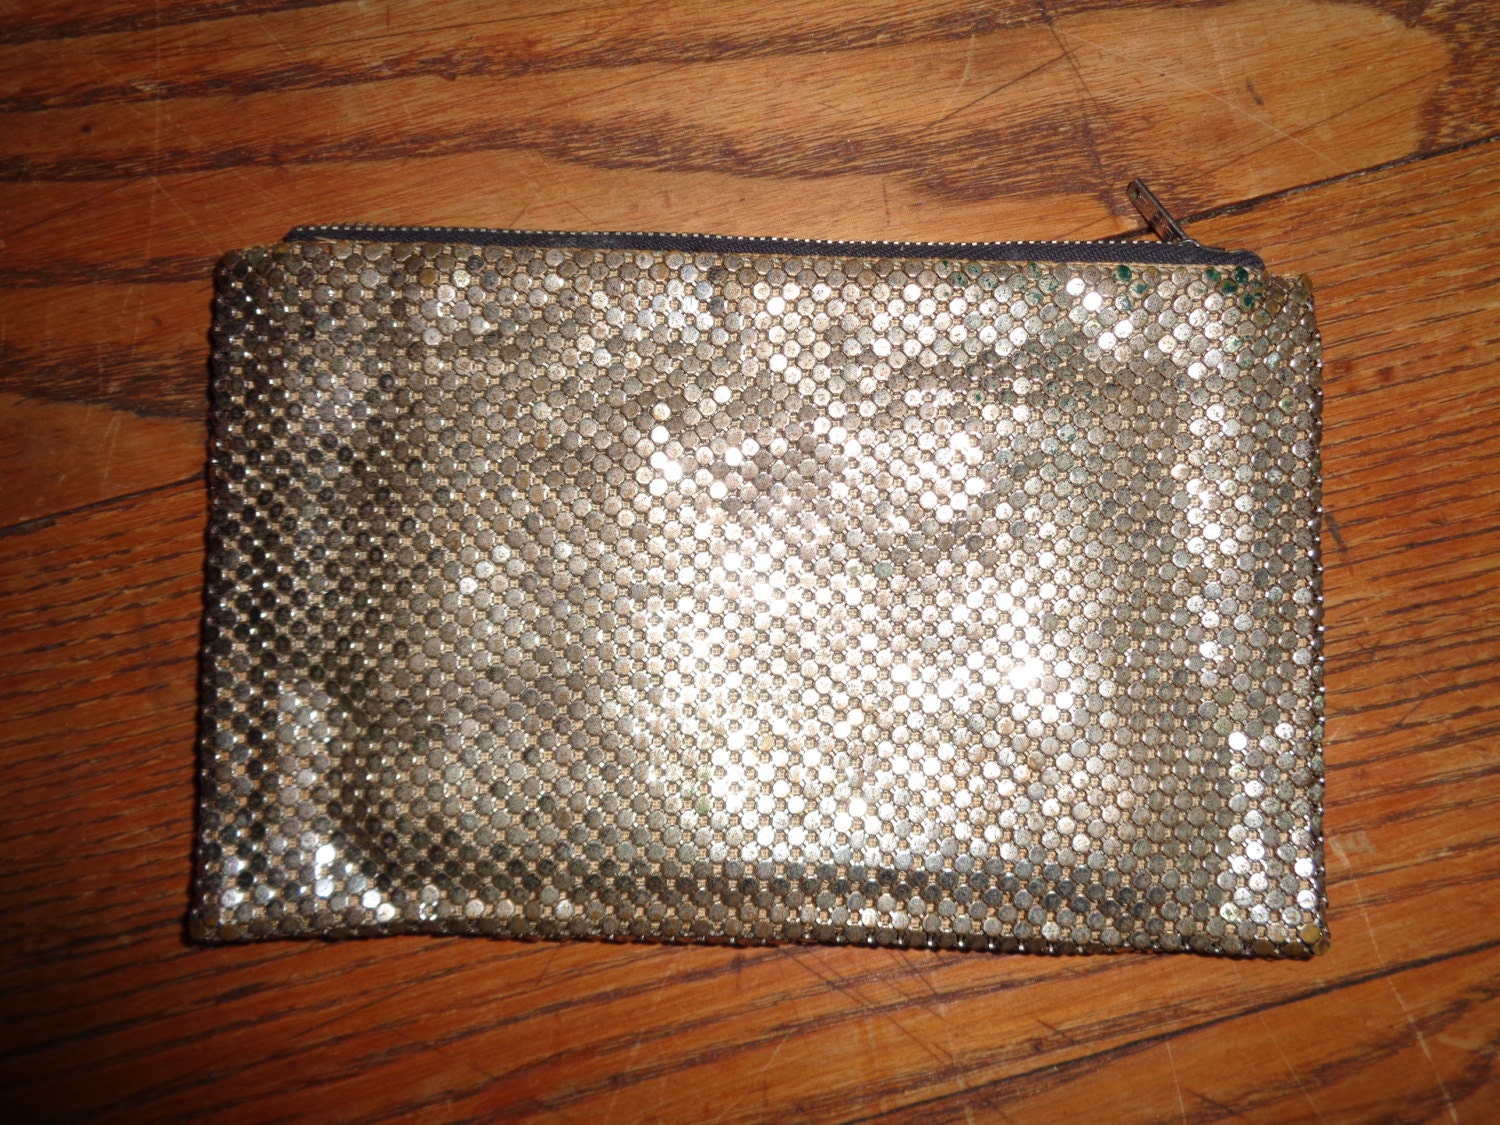 Vintage Metal Mesh Coin Purse in Vintage Condition A Whiting